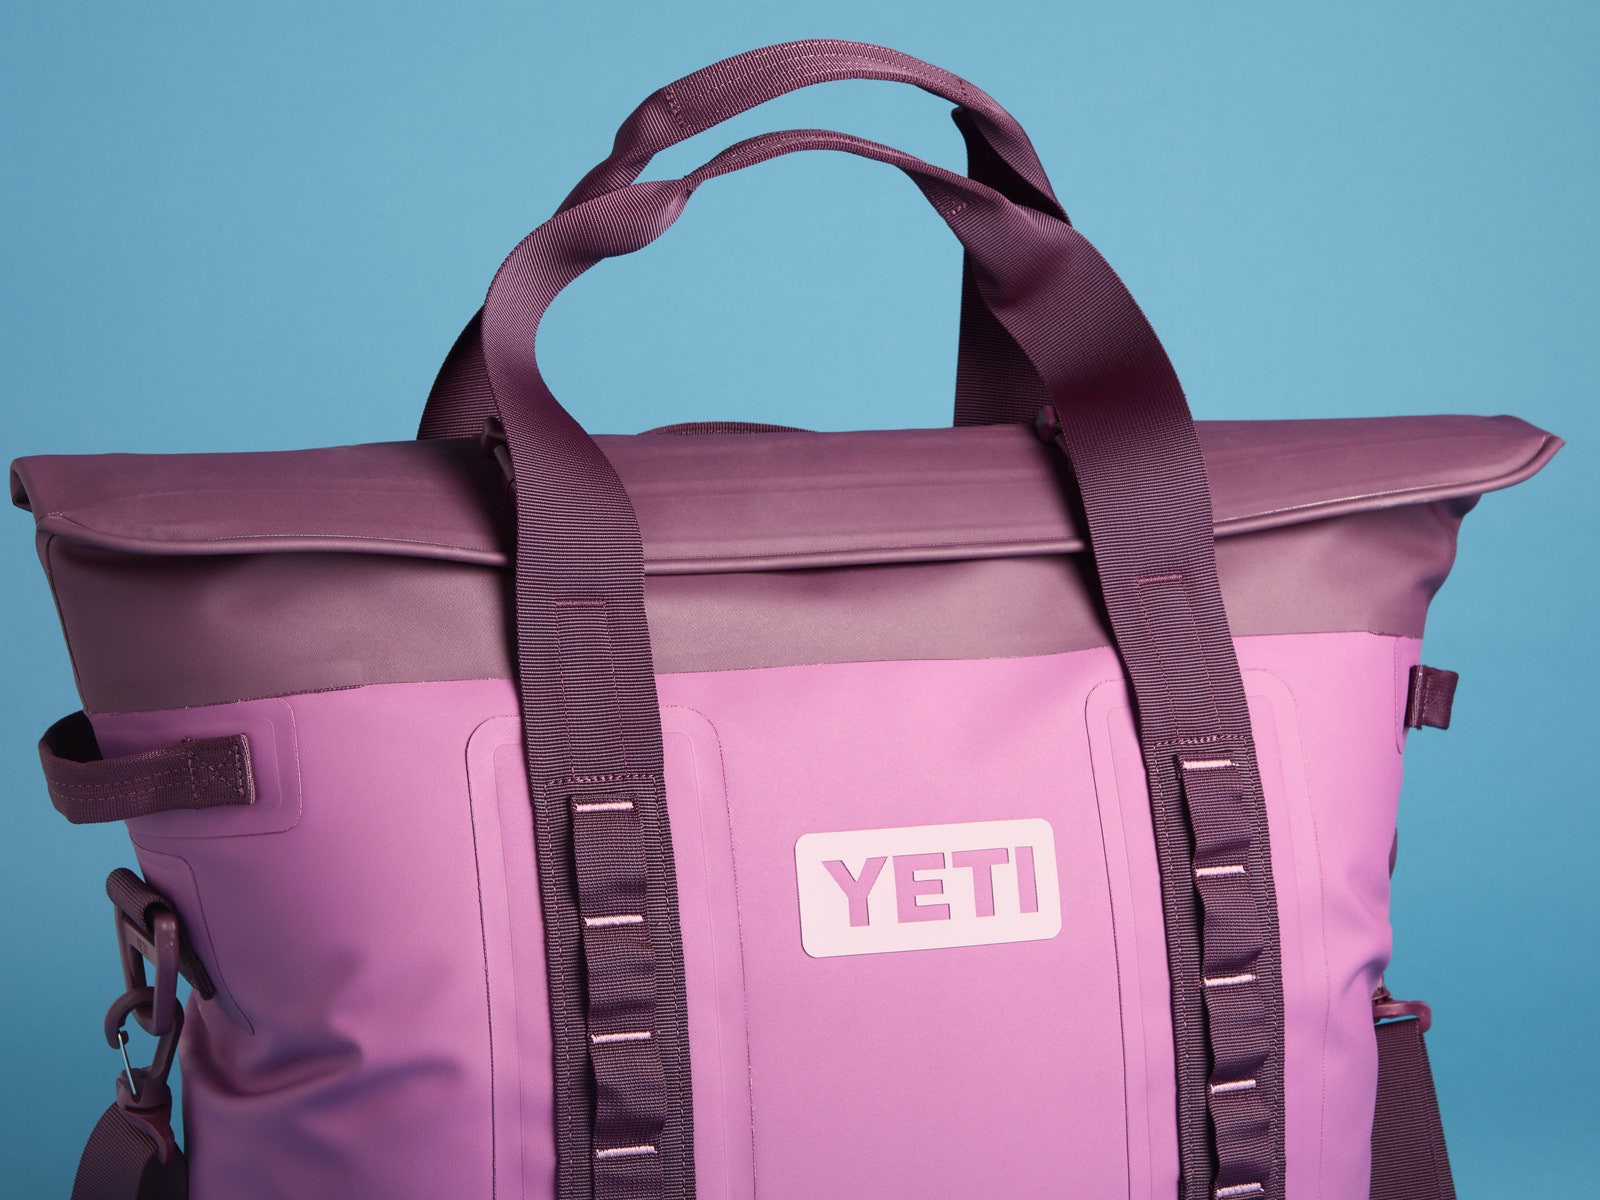 The Yeti Cooler Buying Guide&-Find One That's Right for You